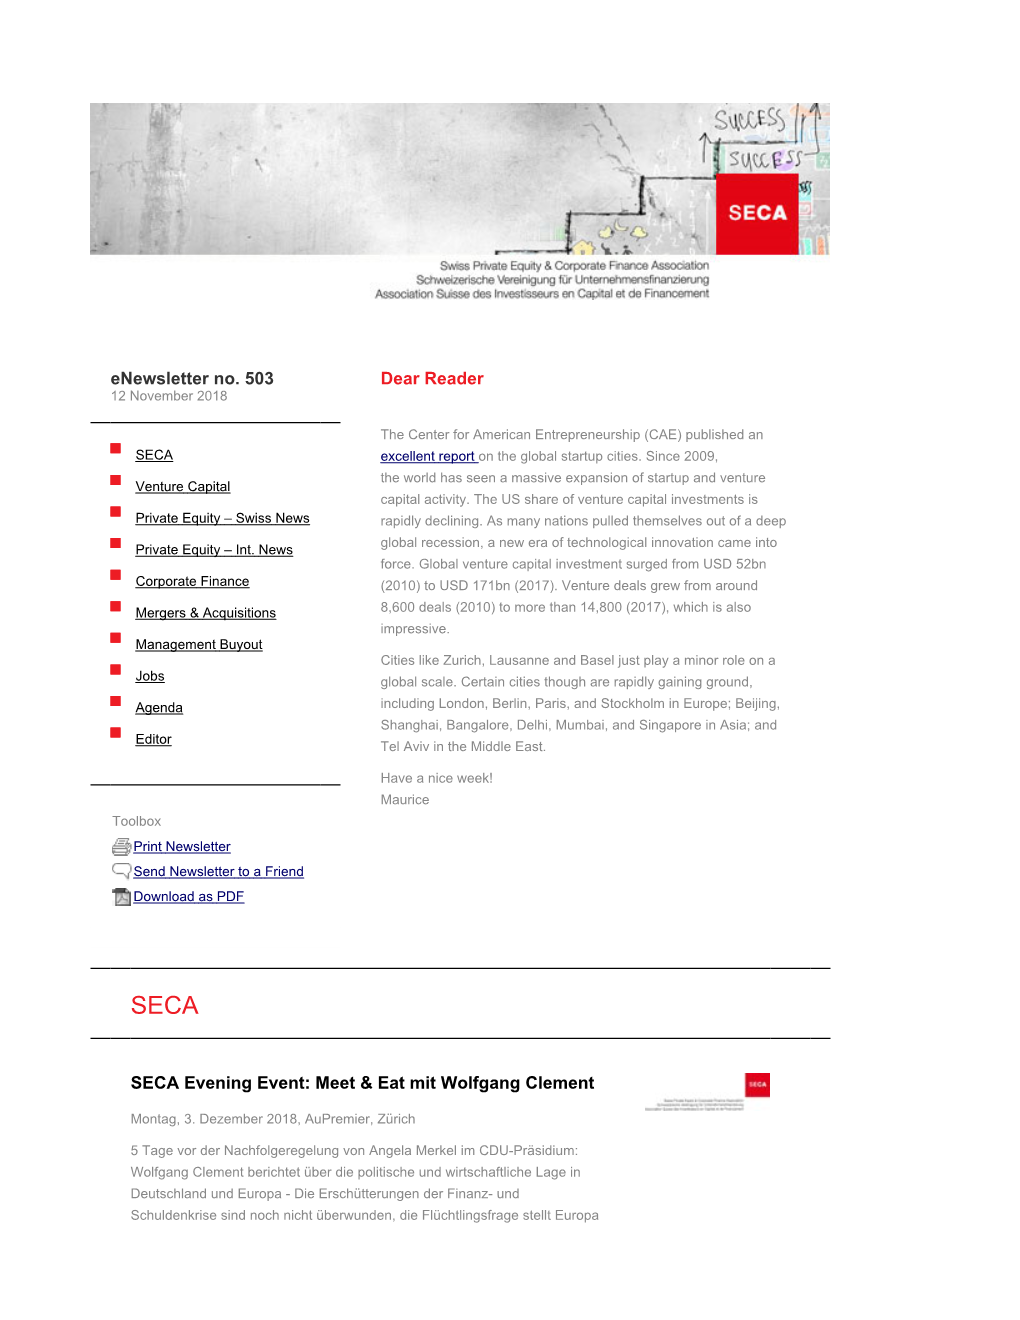 Enewsletter No. 503 | SECA | Swiss Private Equity & Corporate Finance Association